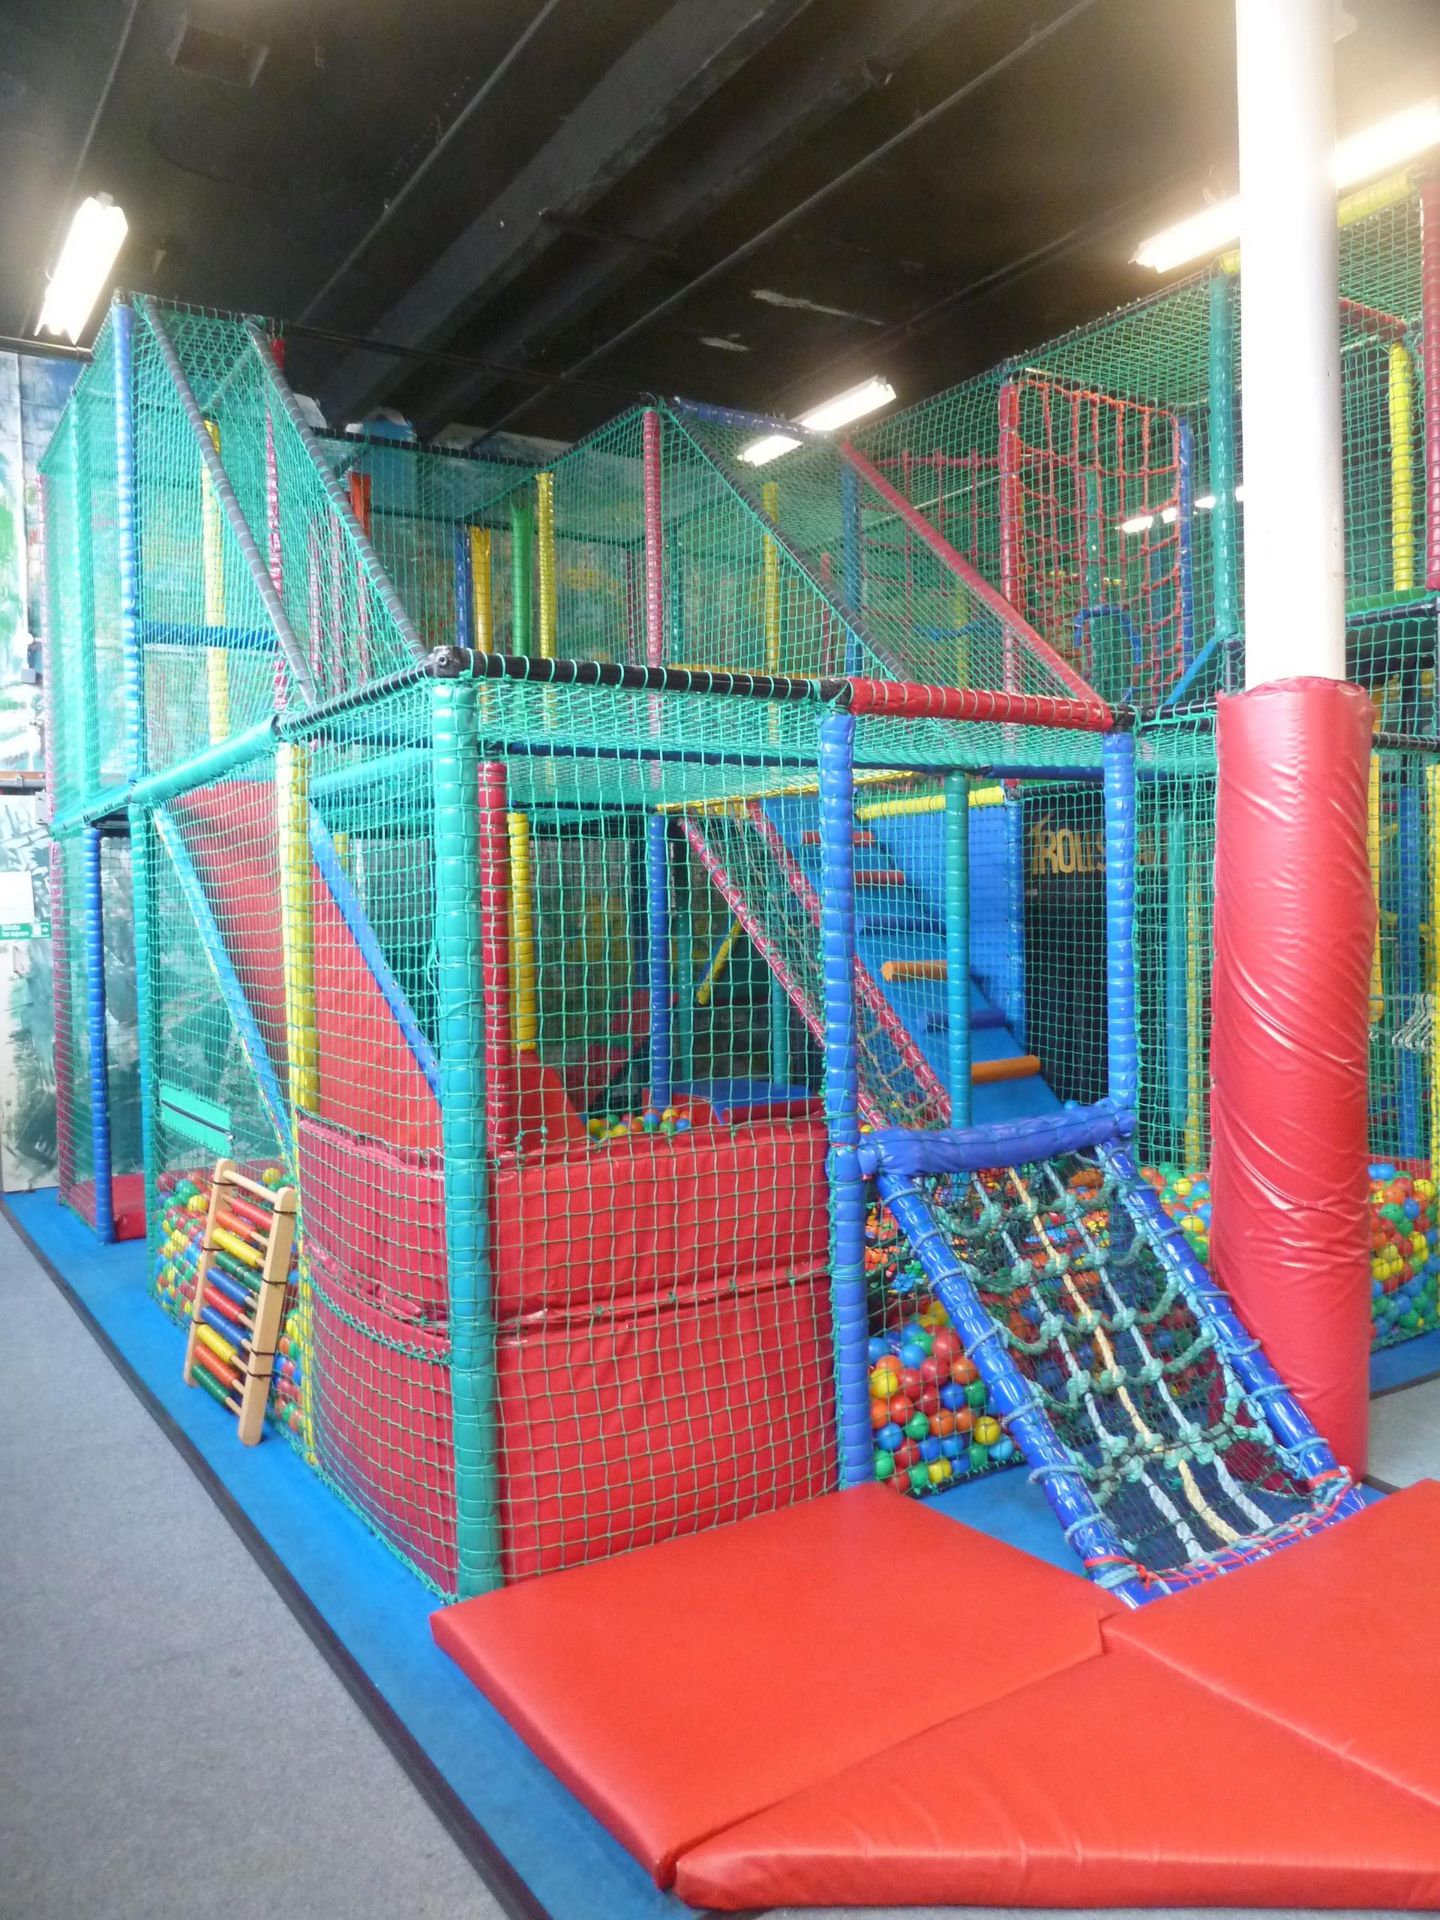 *Large soft play construction - 7.8m w x 5.8m d x 4.2m h. Constructed over two levels - Image 31 of 34